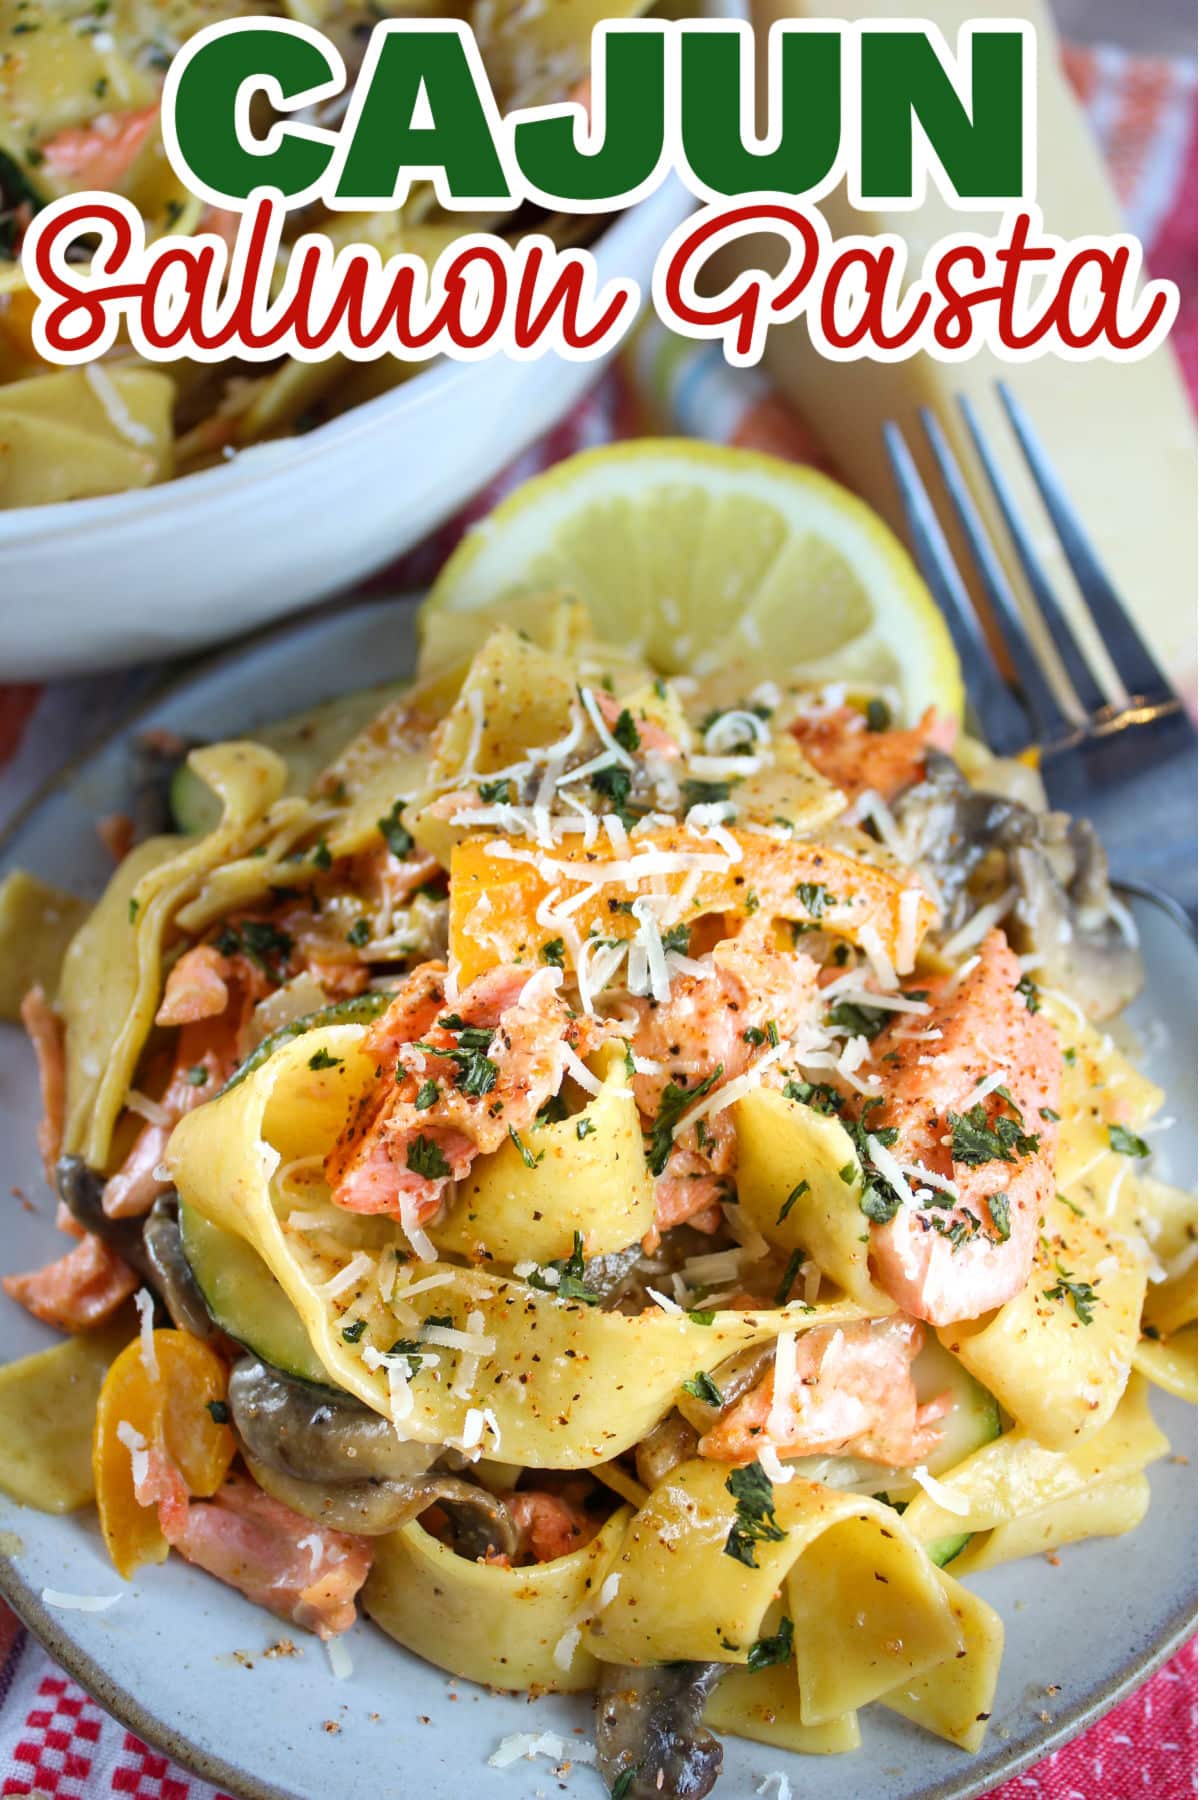 This Cajun Salmon Pasta is done in the amount of time it takes to make your pasta! It's quick, creamy, full of your favorite veggies and delicious! Juicy chunks of flaky salmon tossed in a spicy cream sauce over pappardelle noodles - it will be your new favorite! via @foodhussy